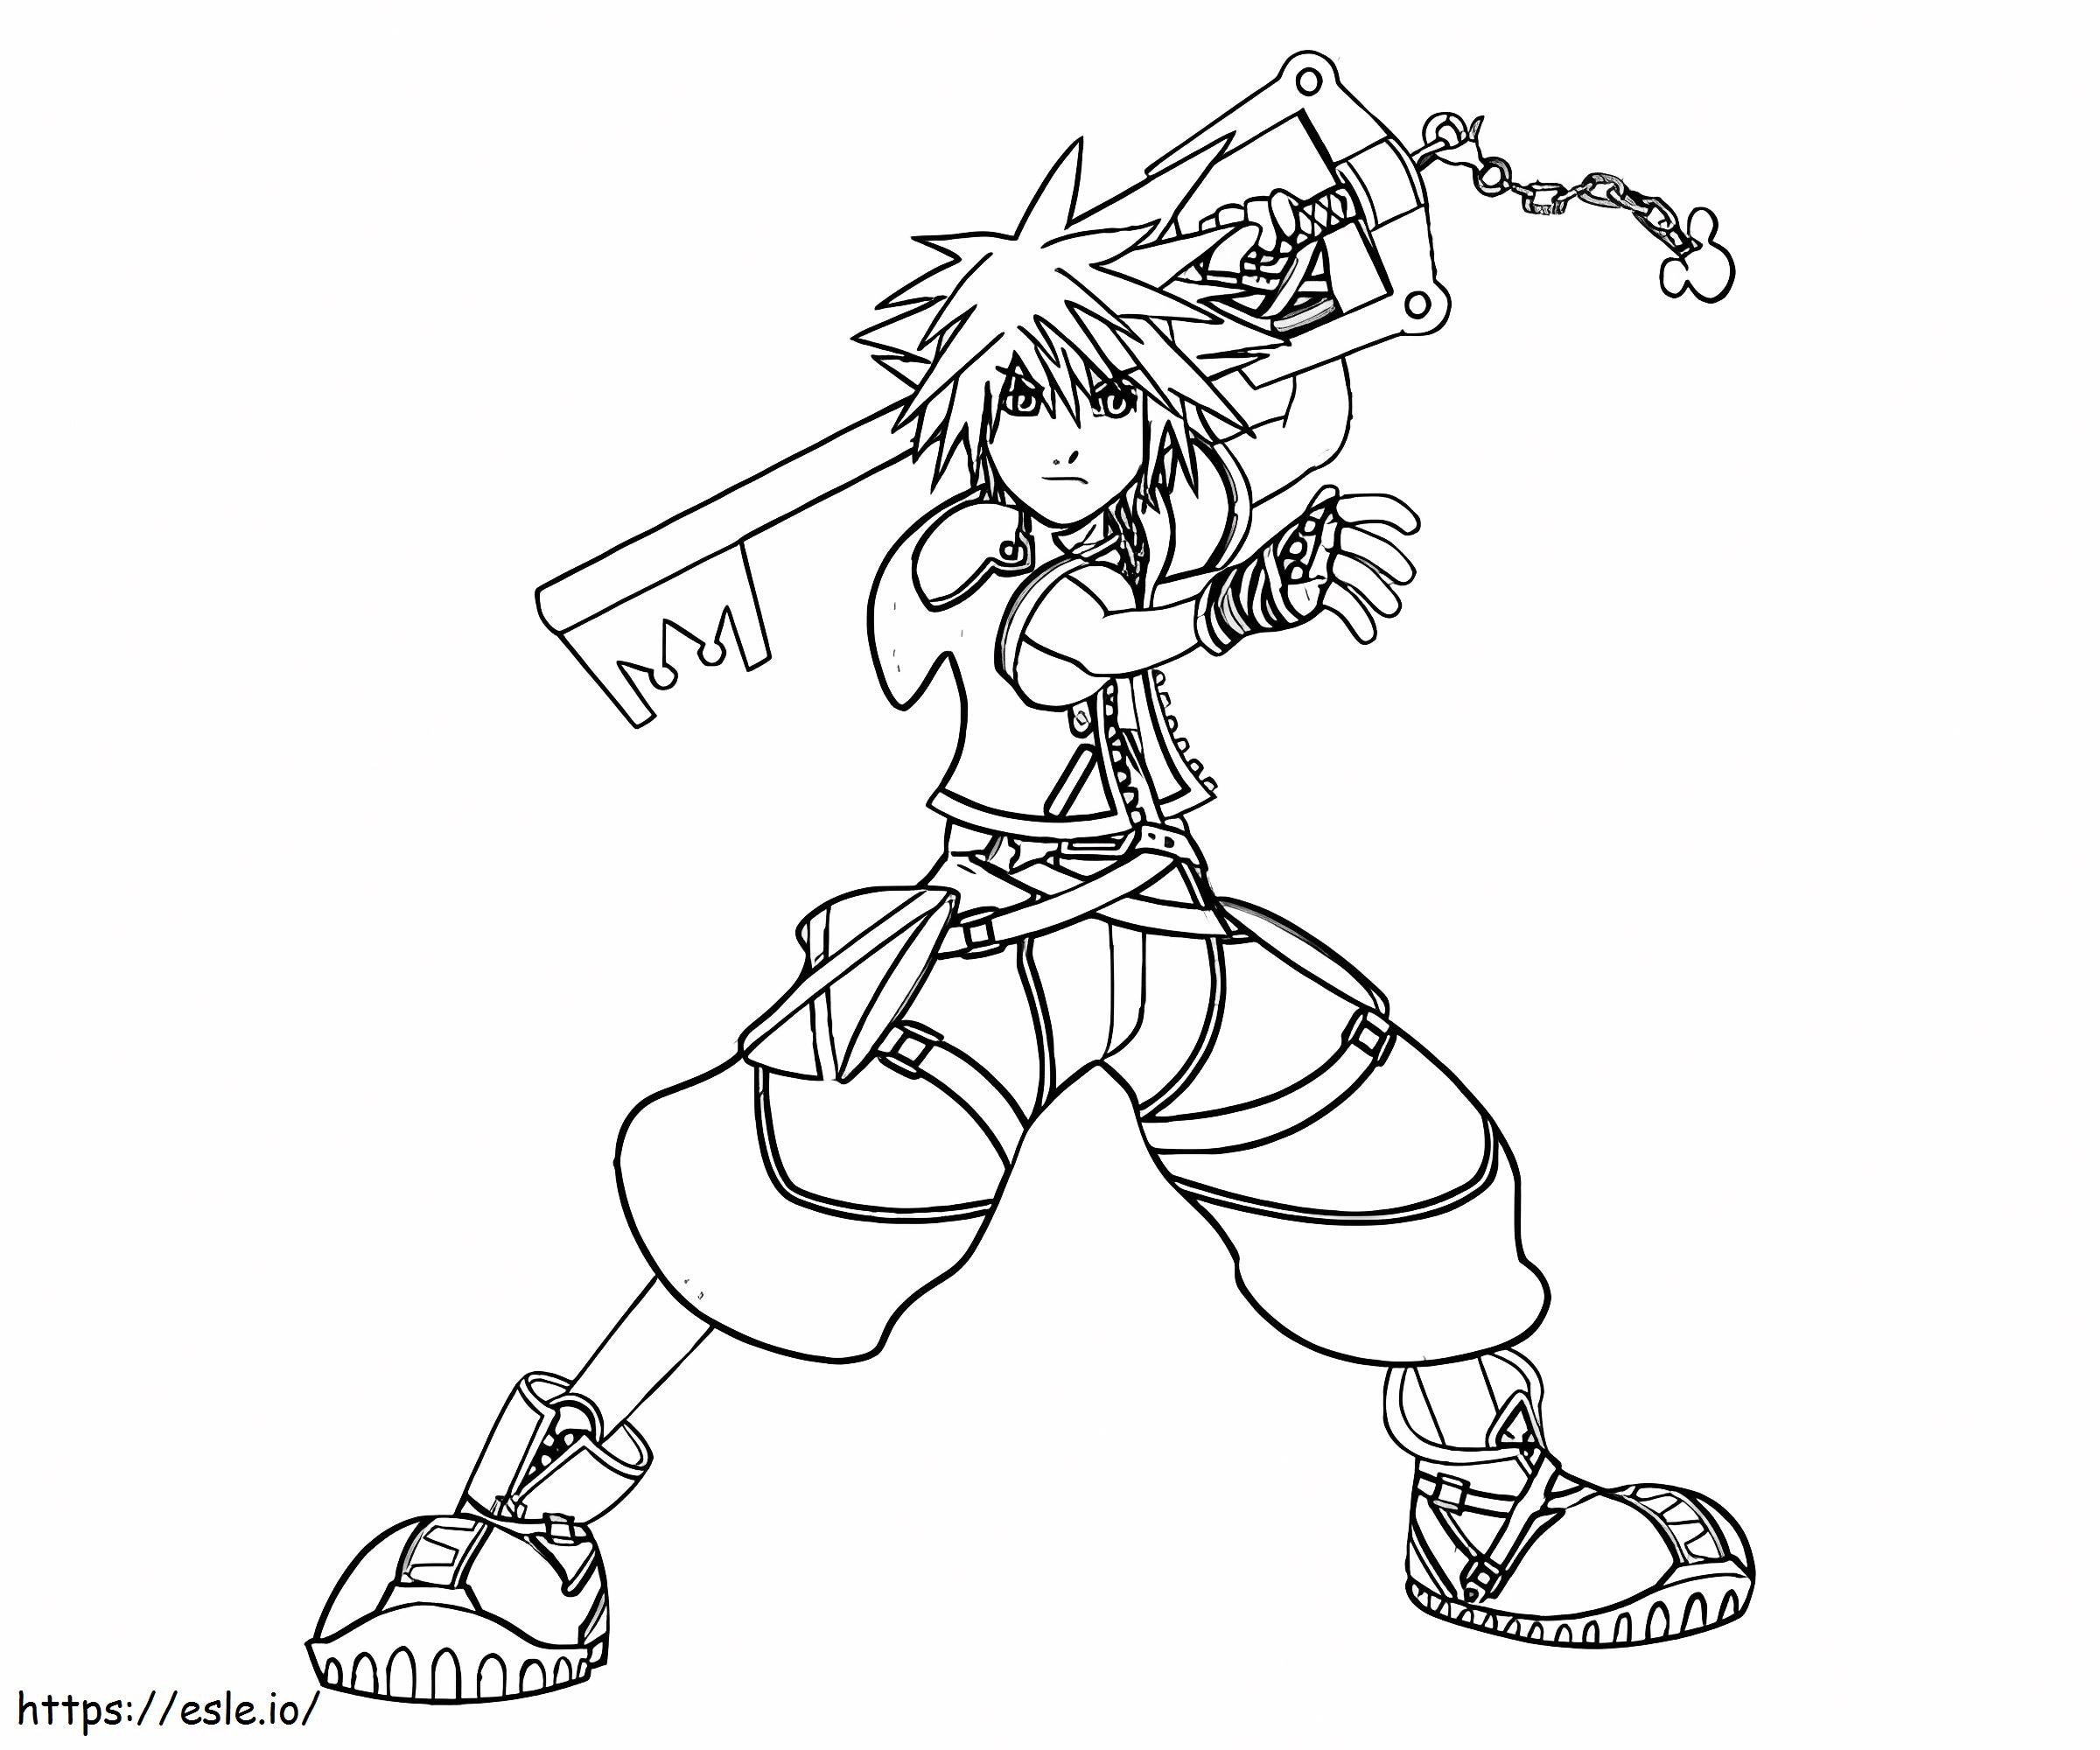 Sora And Key Blade coloring page